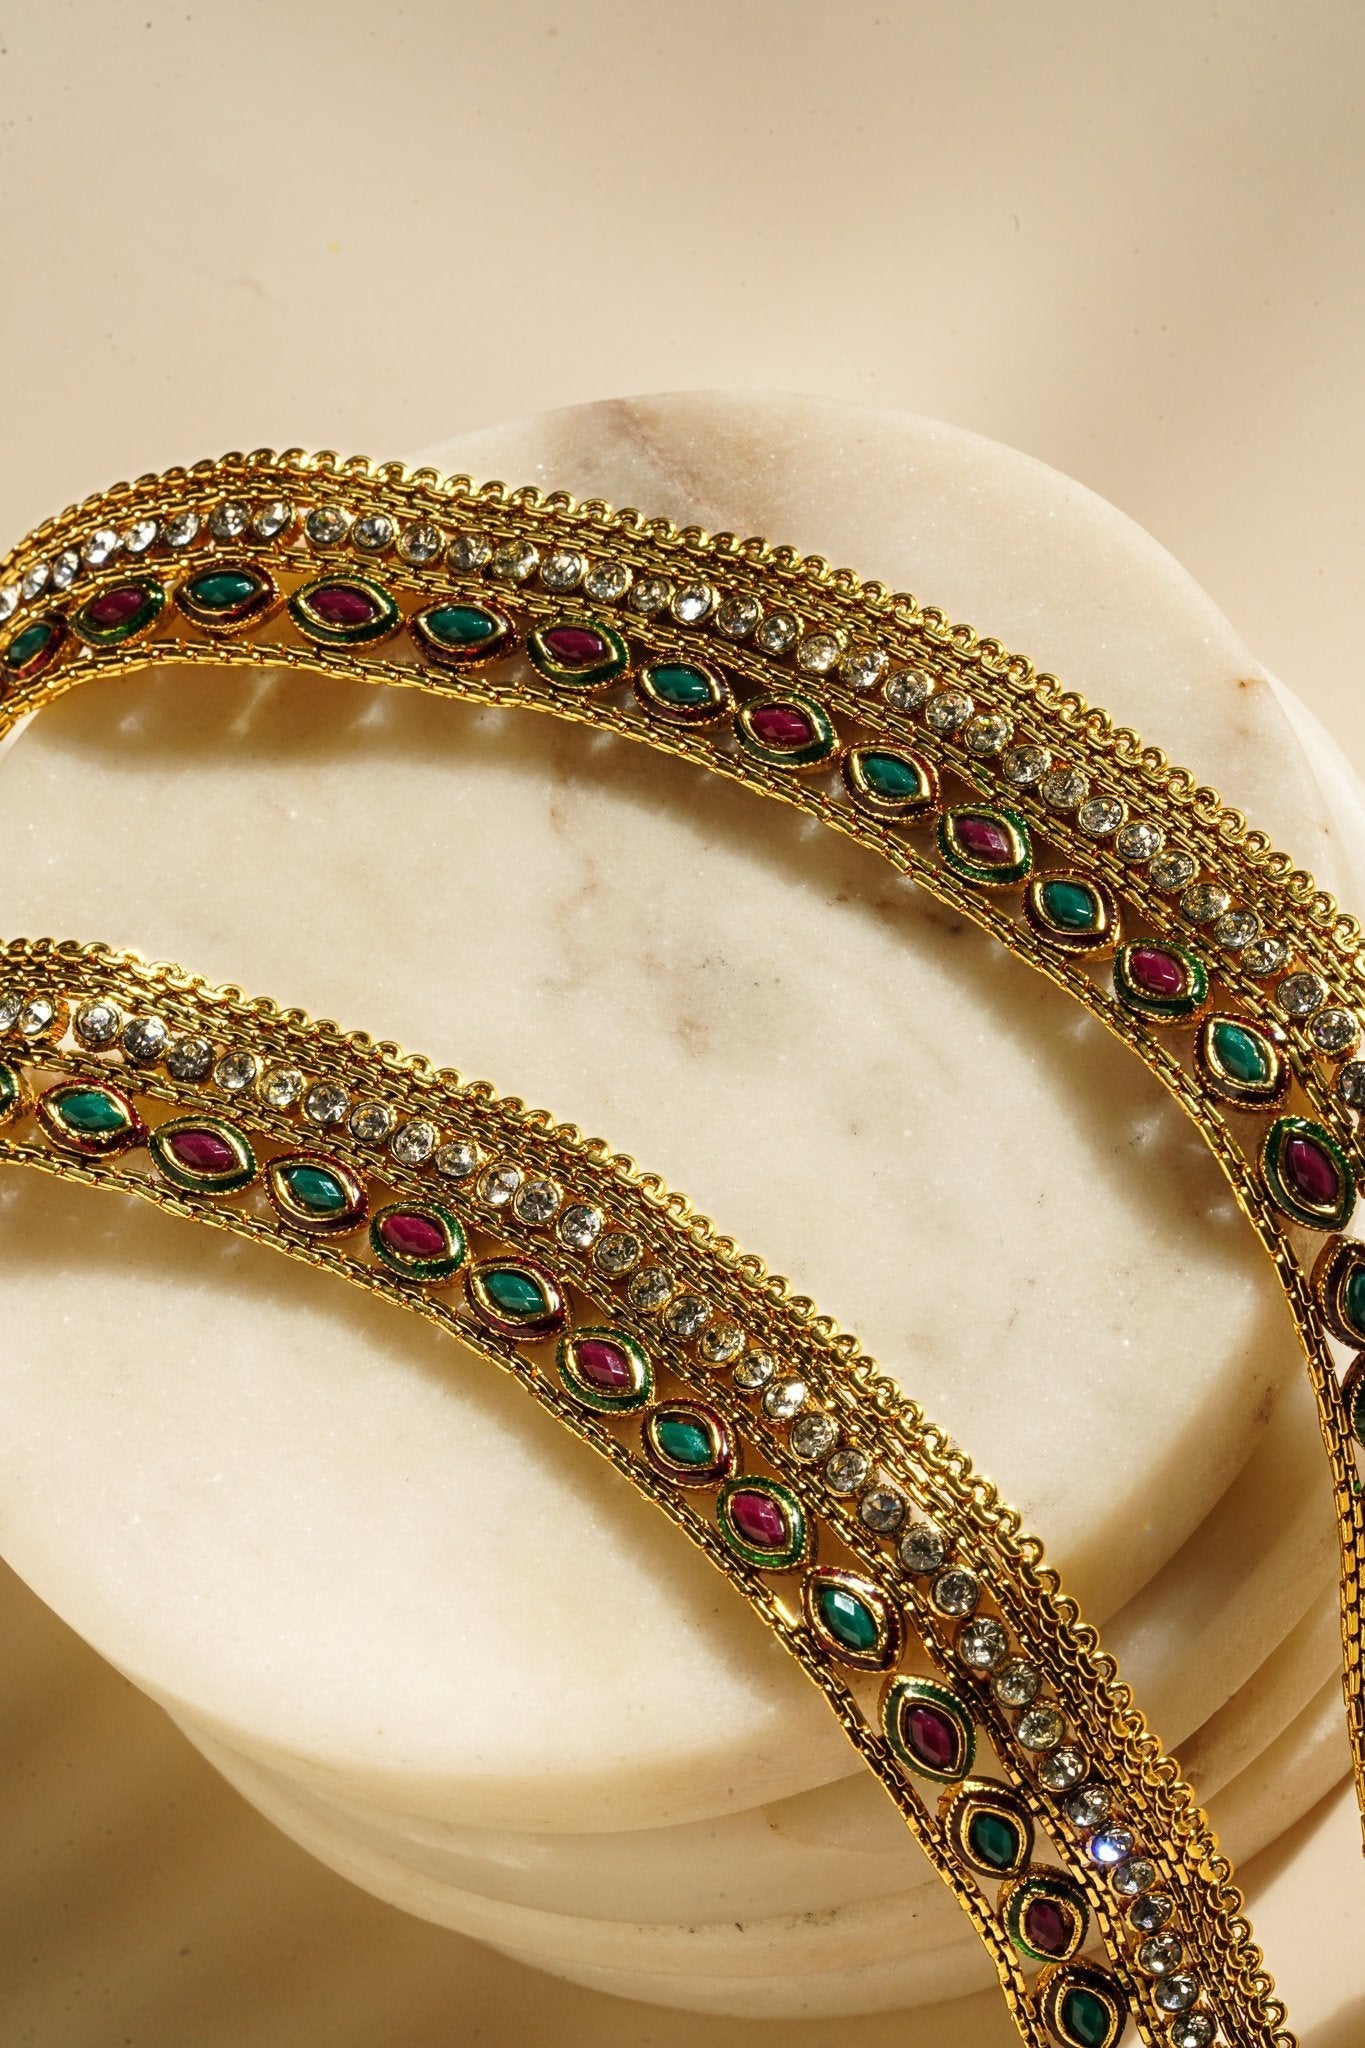 Nupur - Golden Kundan Anklets Anklets from Inaury